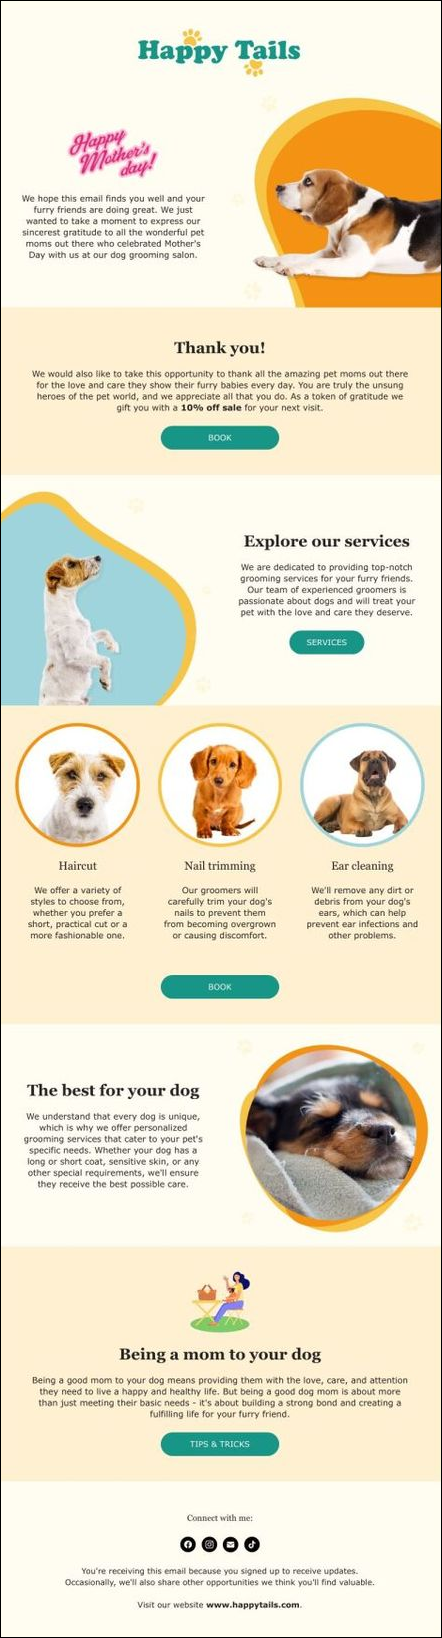 Pet care brand Happy Tails email